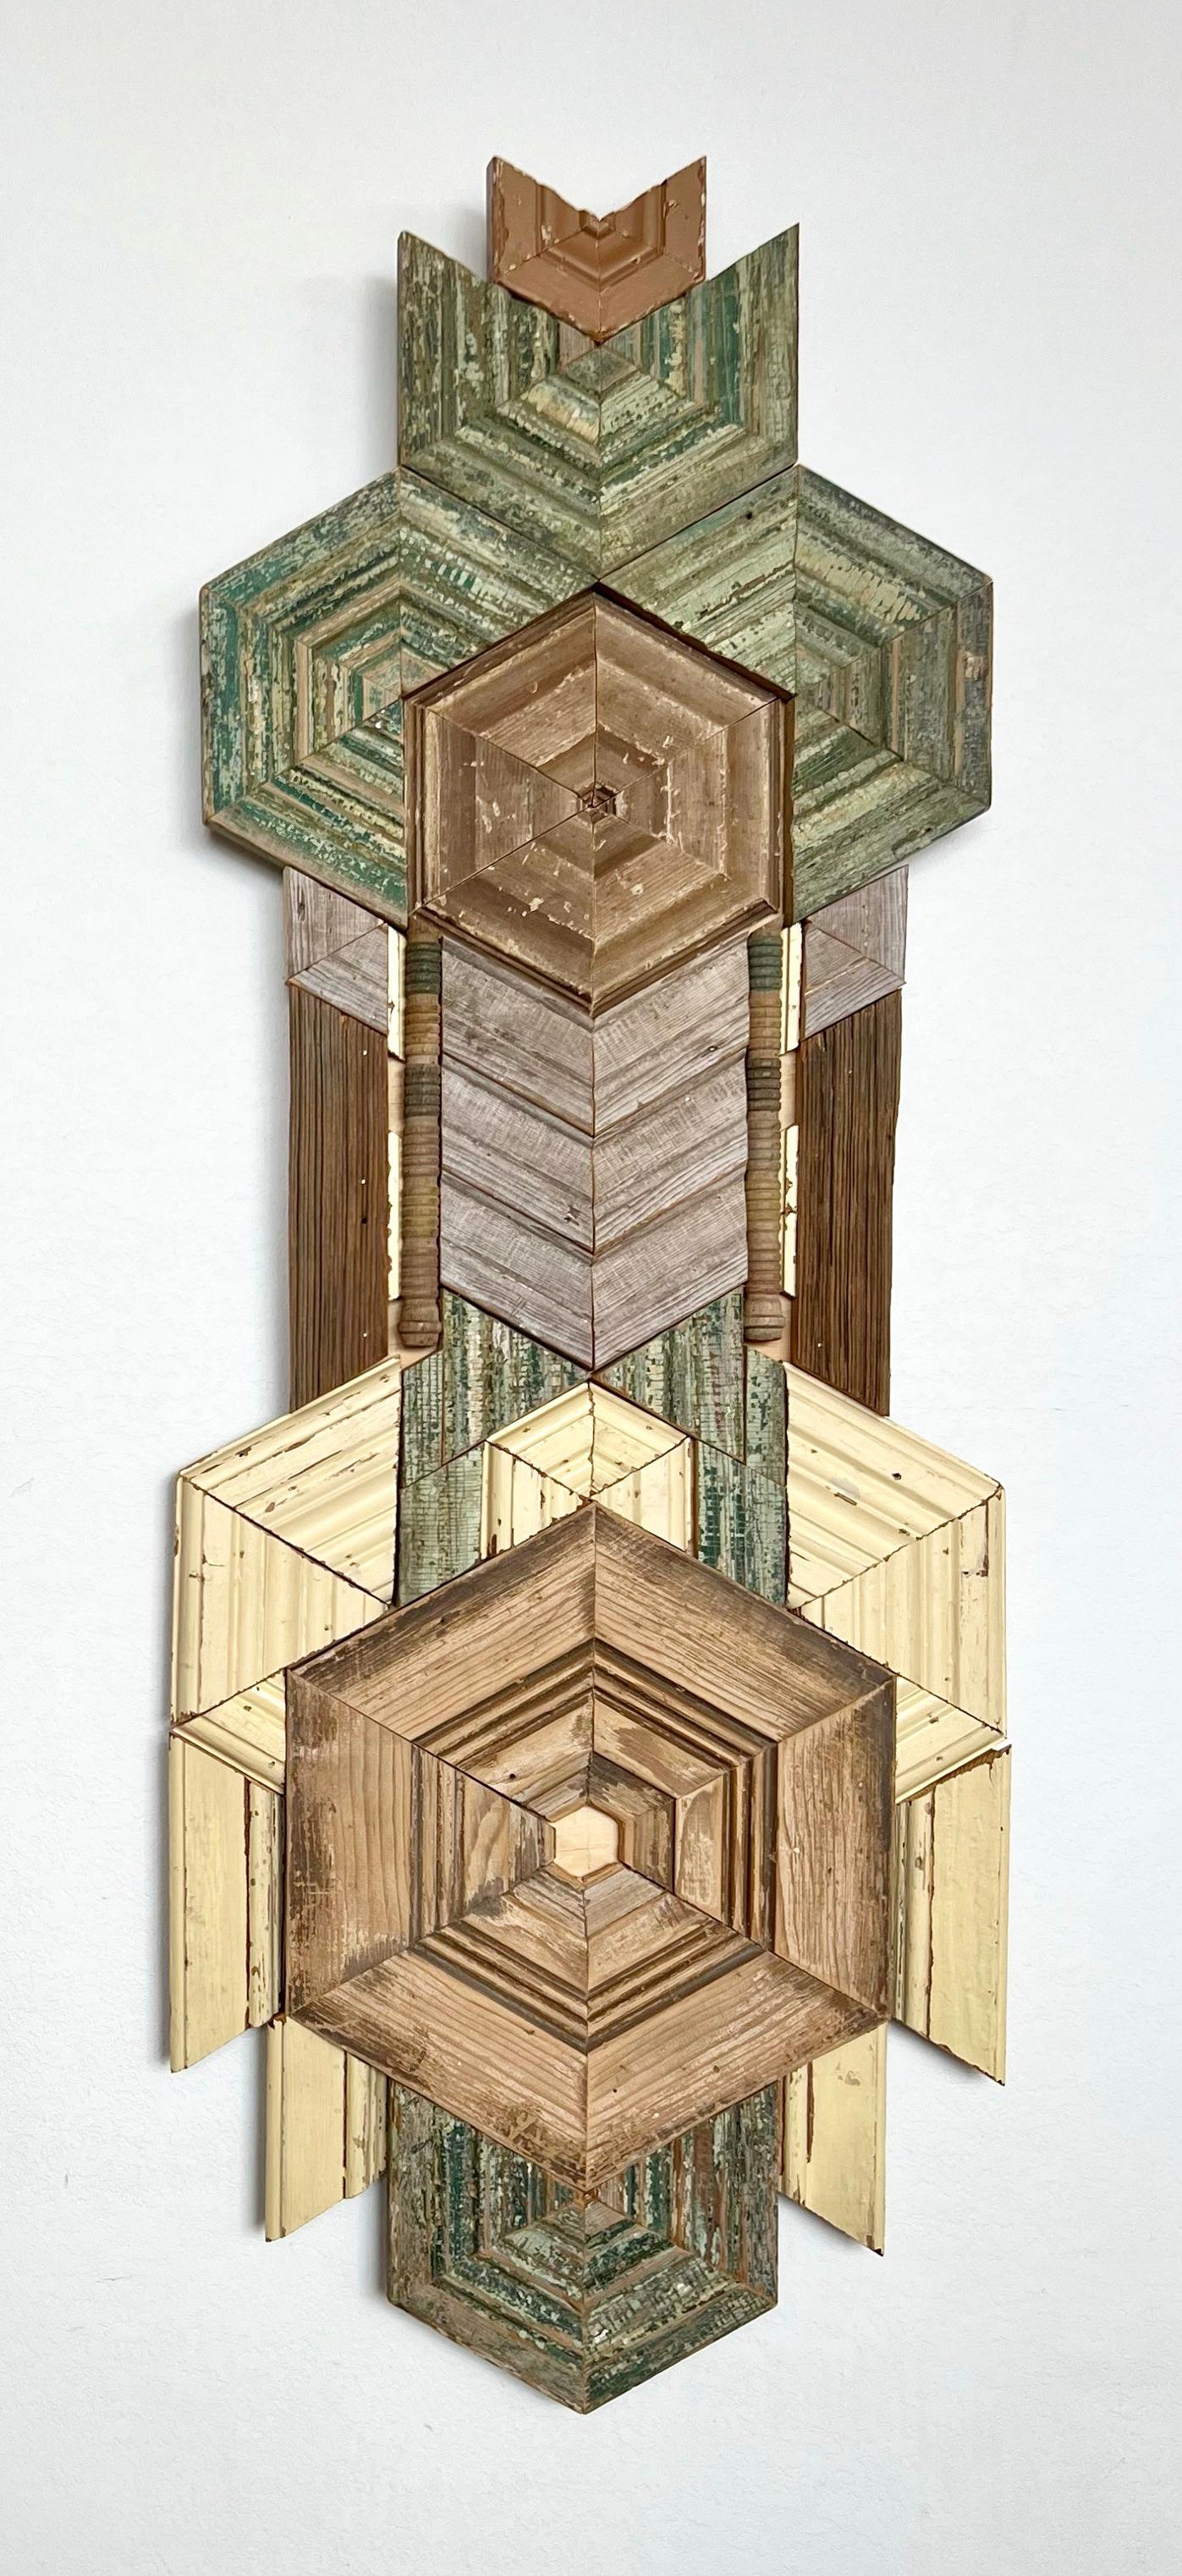 Benjamin Lowder Abstract Sculpture - "Witness at the Crossroads", Contemporary, Wood, Wall Sculpture, Geometric